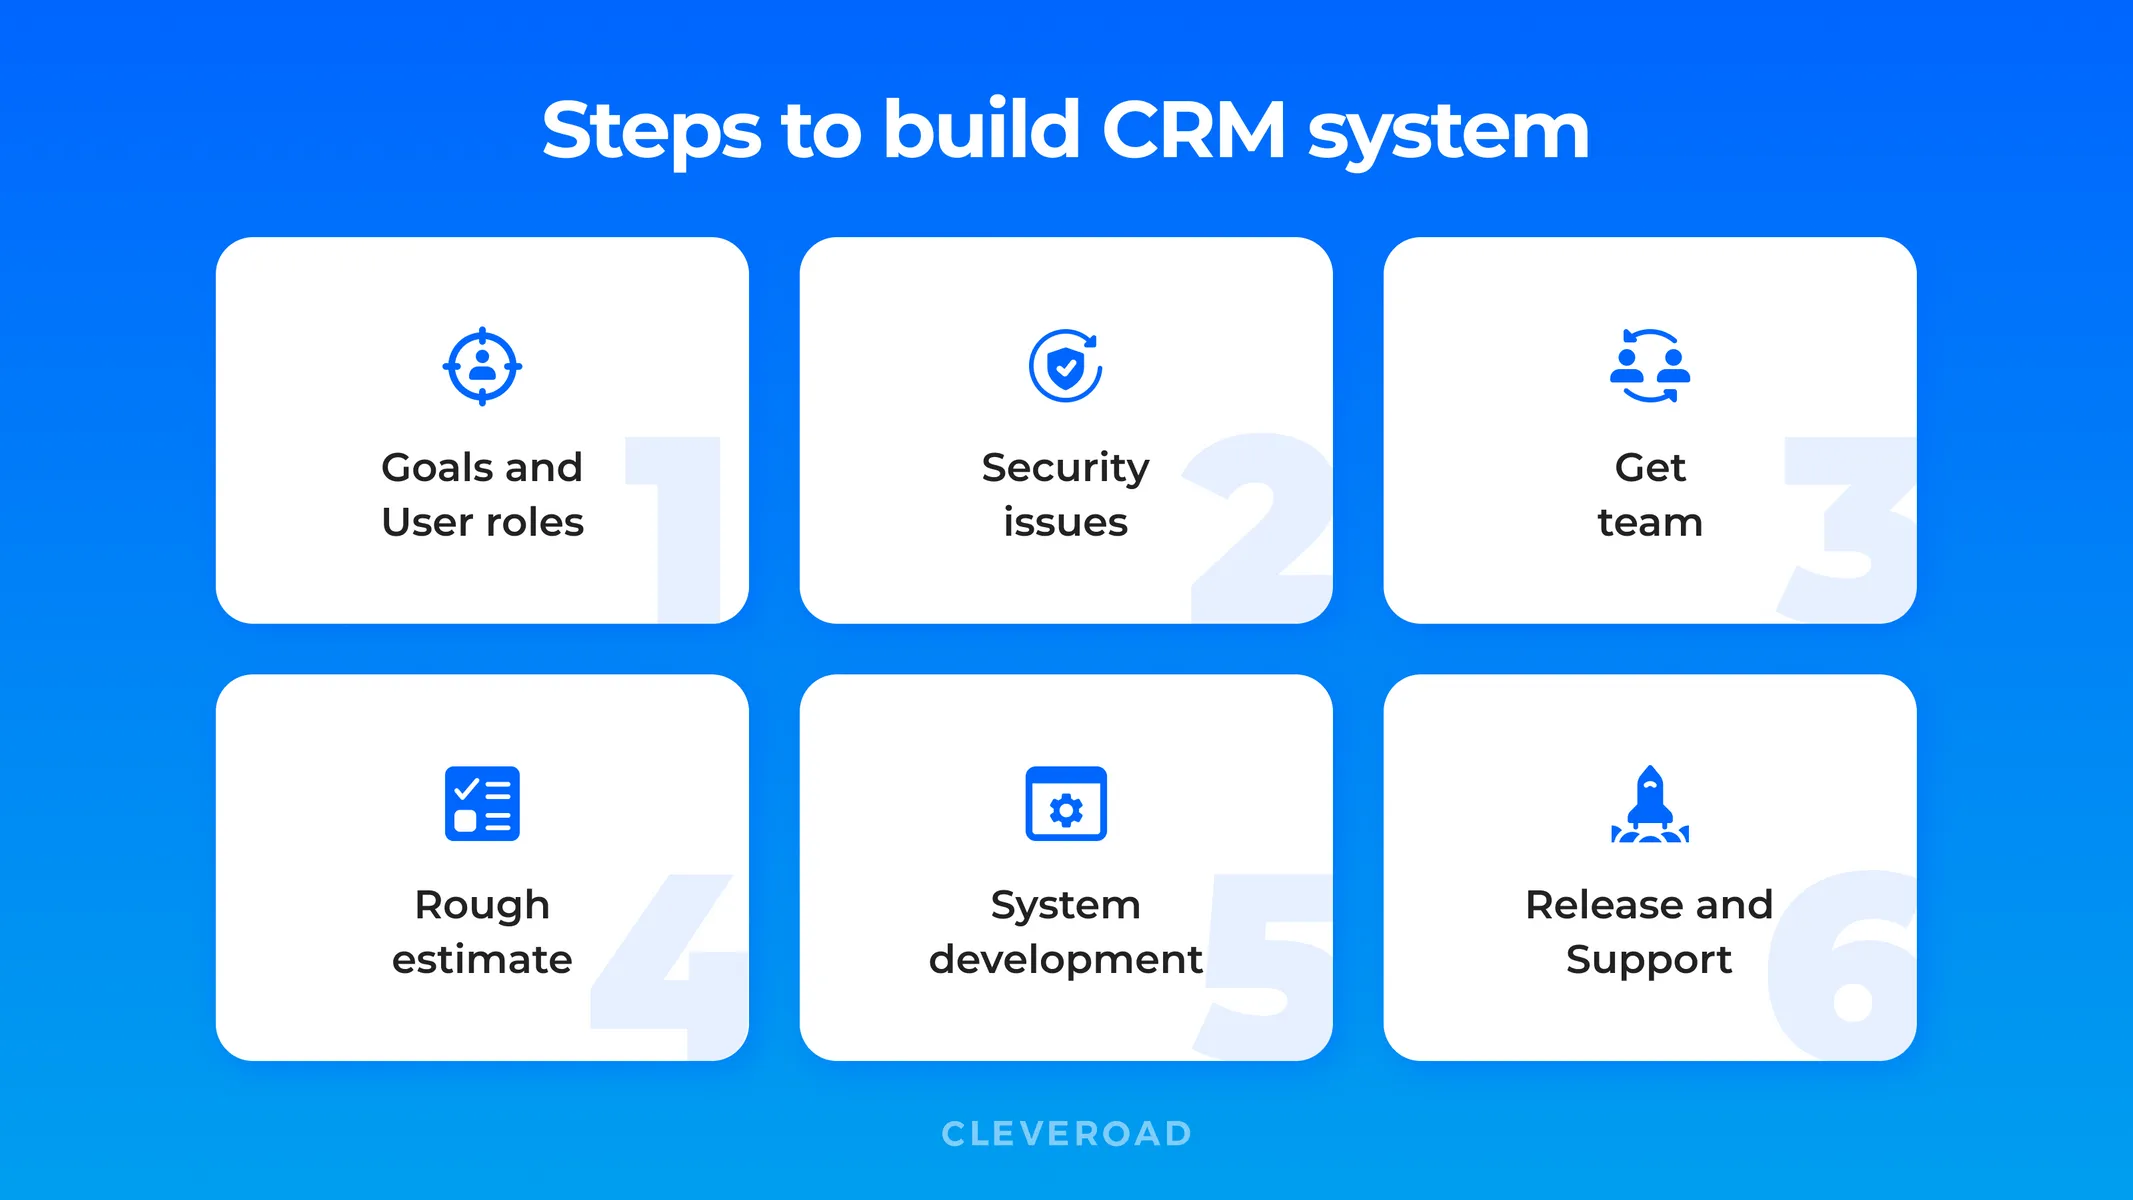 Steps to build CRM software